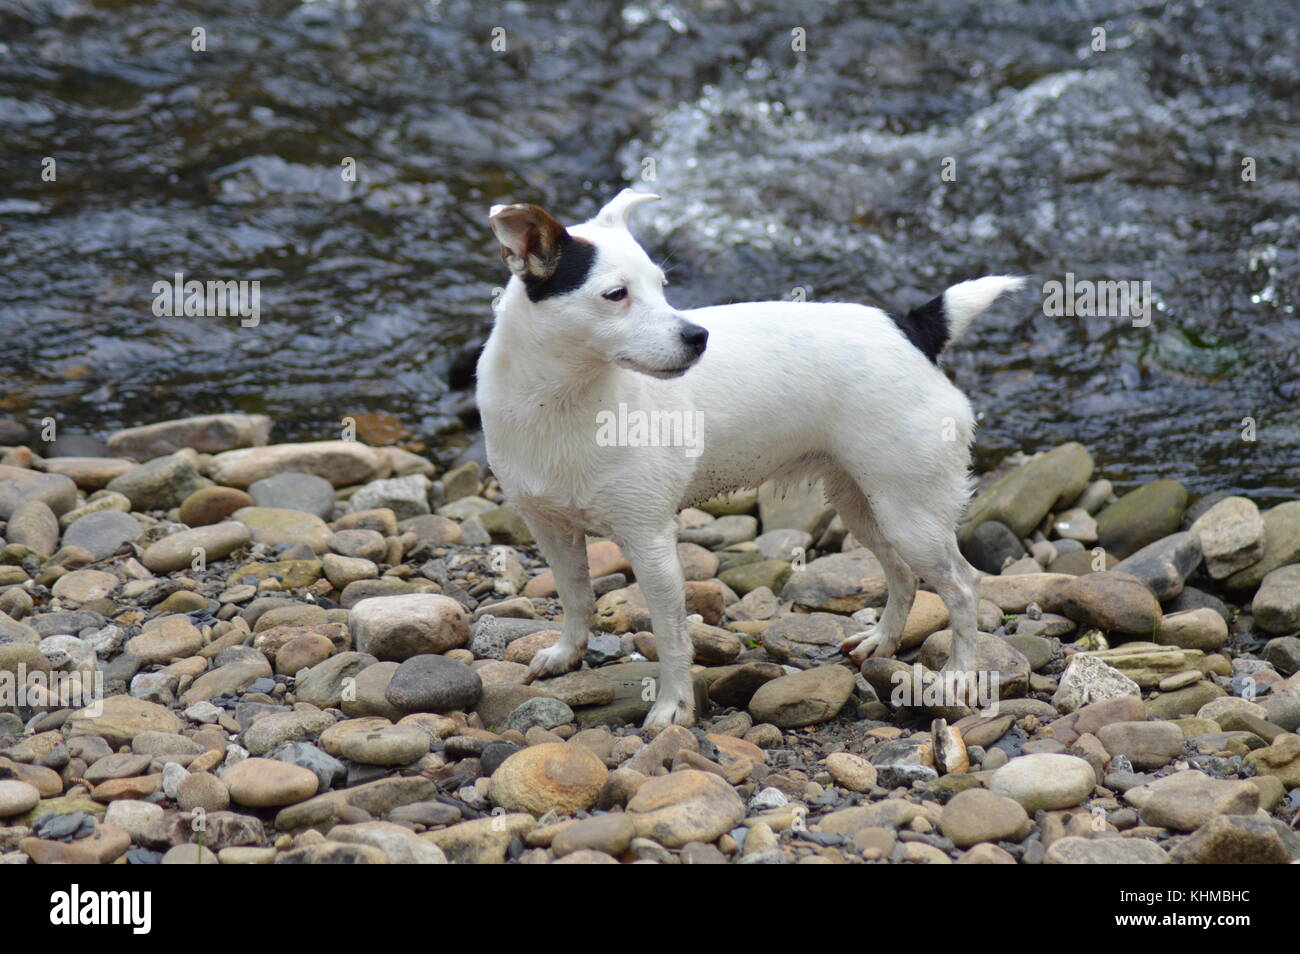 Female jack Russell dog stood by side of river Stock Photo